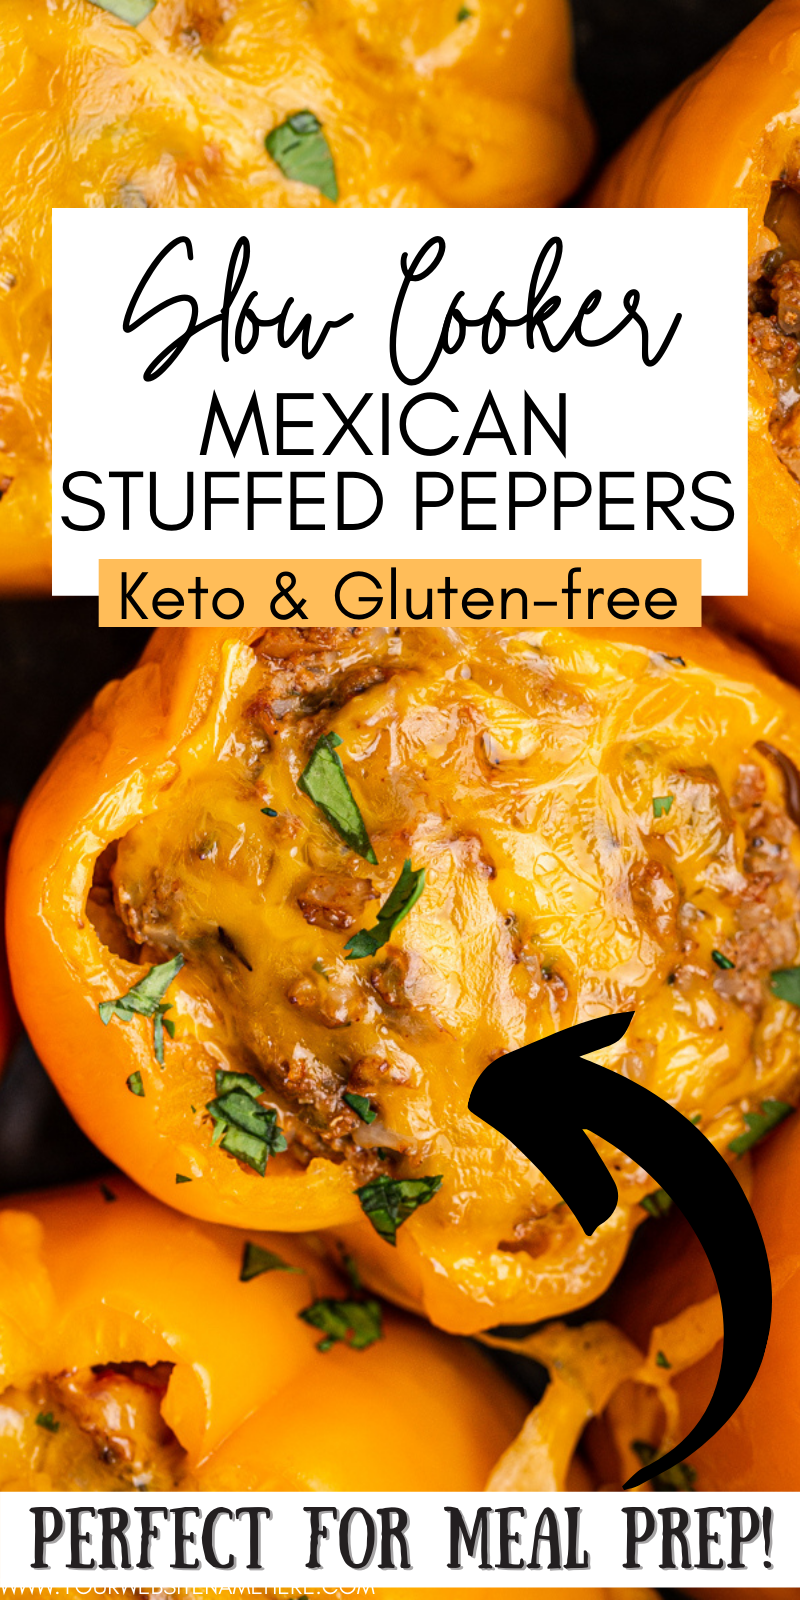 Keto Slow Cooker Mexican Stuffed Peppers - These keto Mexican stuffed peppers are the perfect set it and forget it dinner for Taco Tuesday, or any day. Cheesy and delicious, they are low-carb and gluten-free. #keto #lowcarb #glutenfree #slowcooker #crockpot #mexican #stuffed #peppers